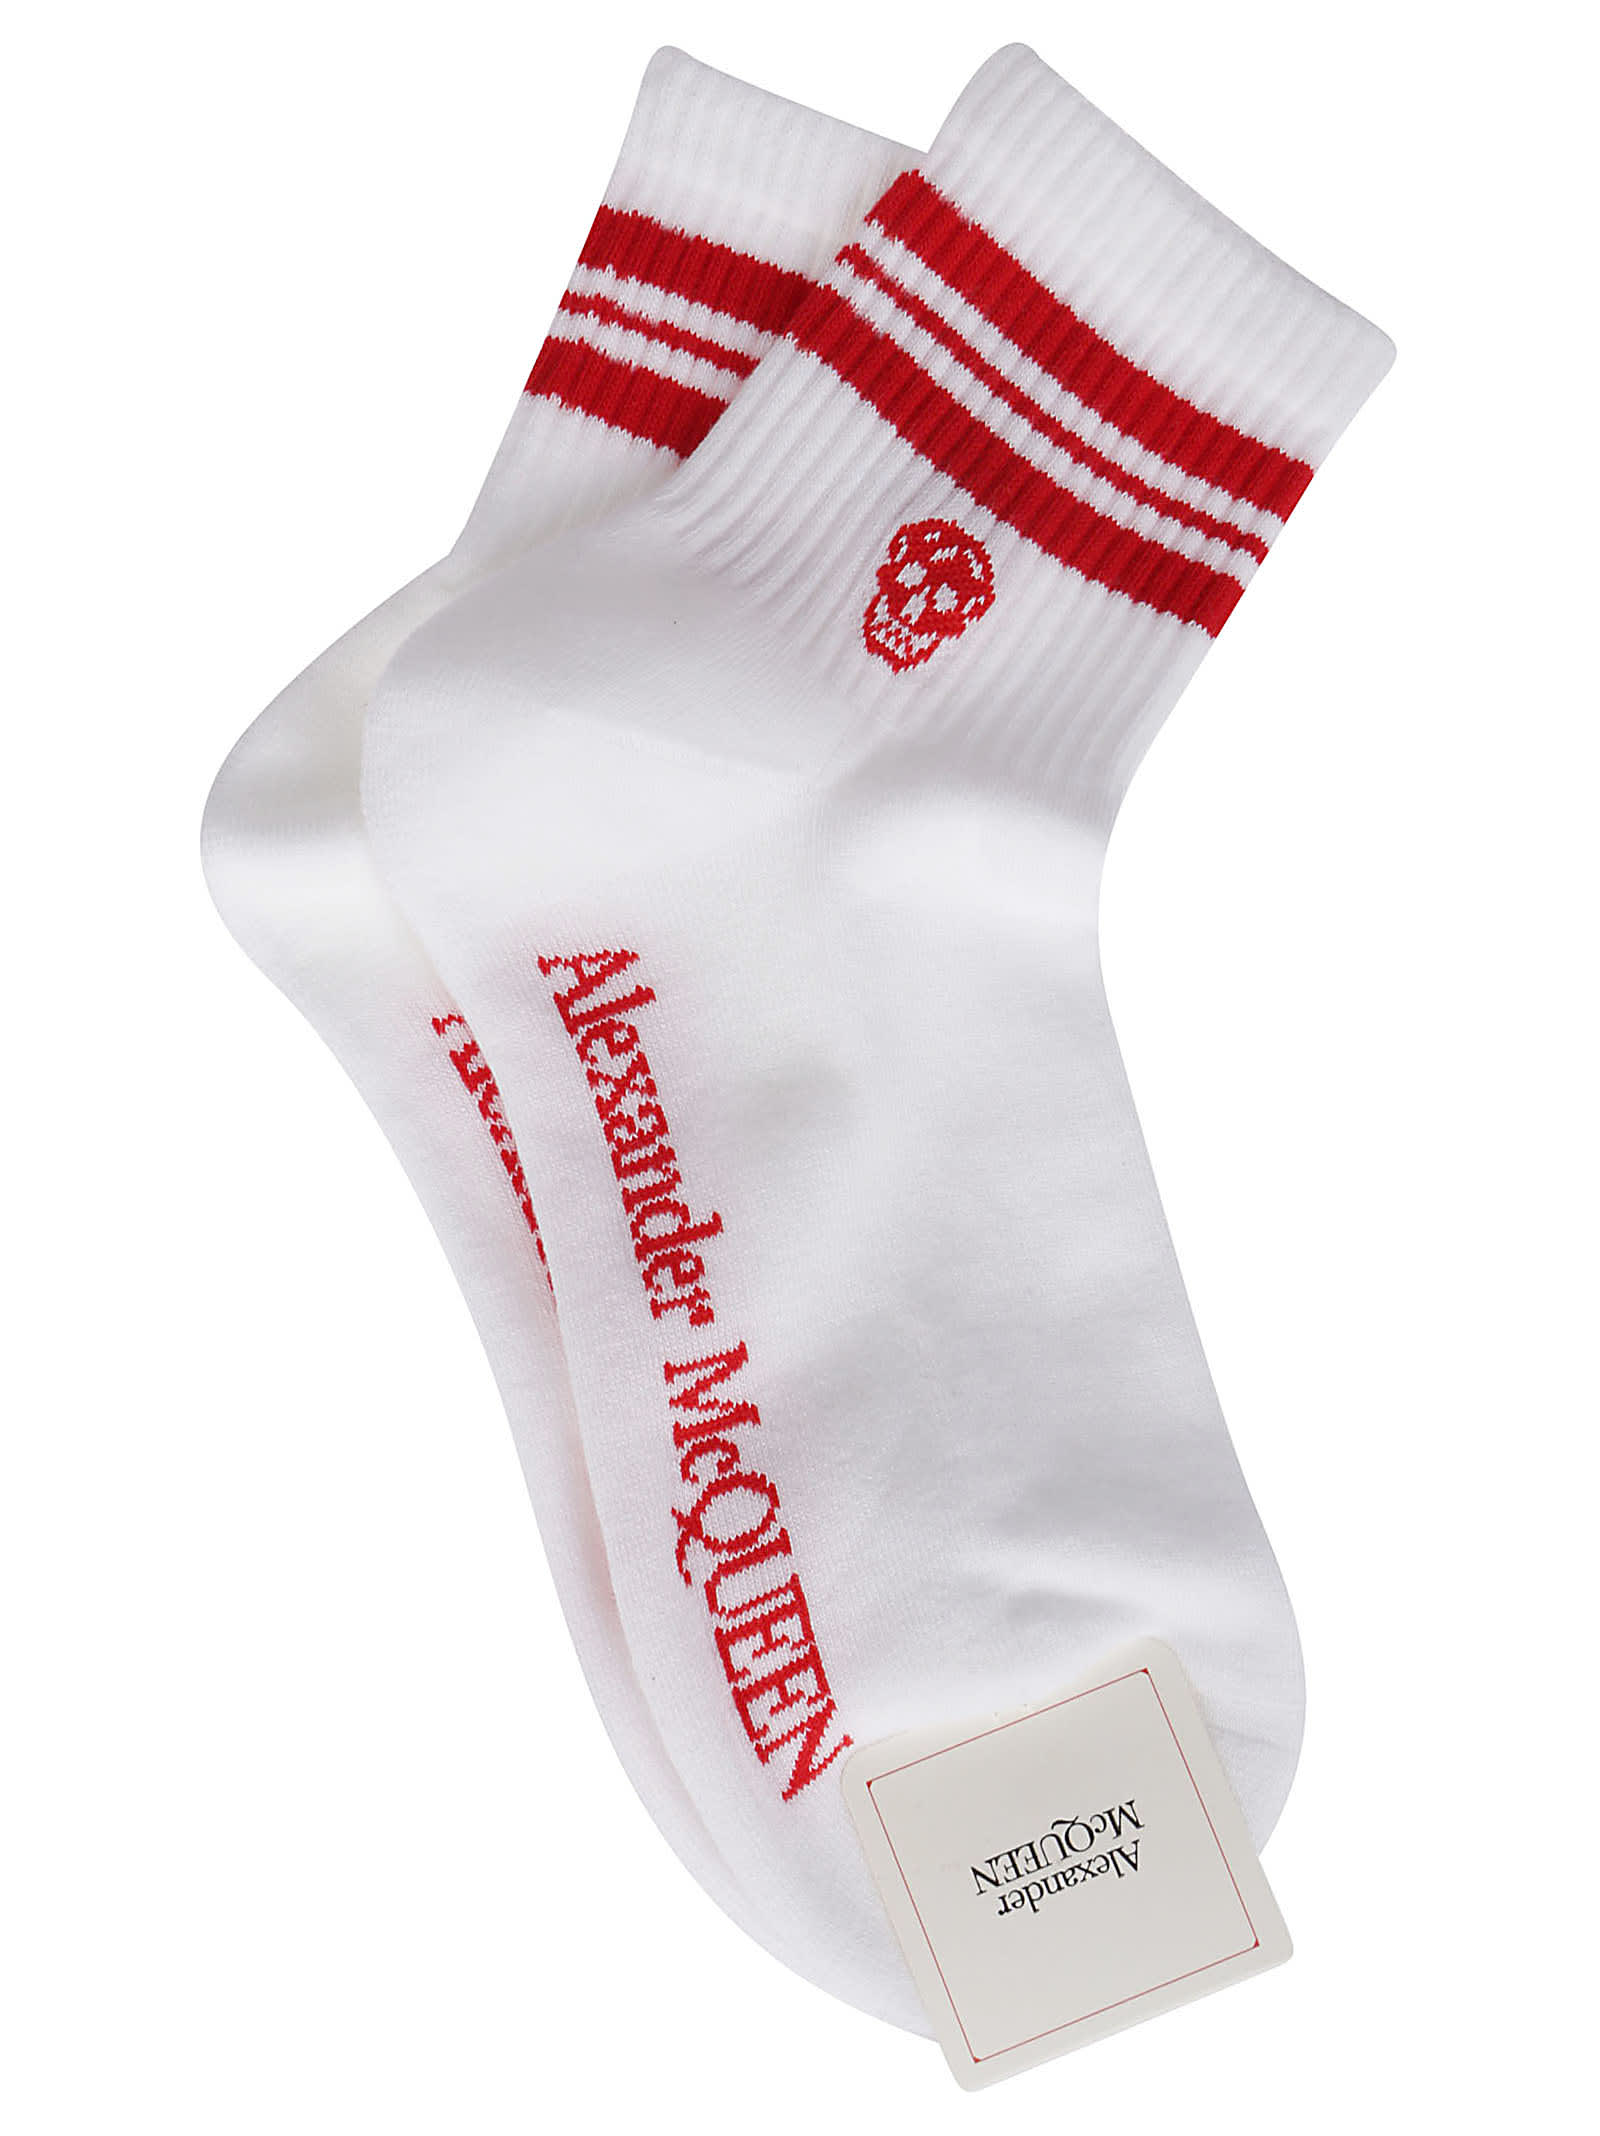 Alexander Mcqueen White And Red Cotton Blend Socks